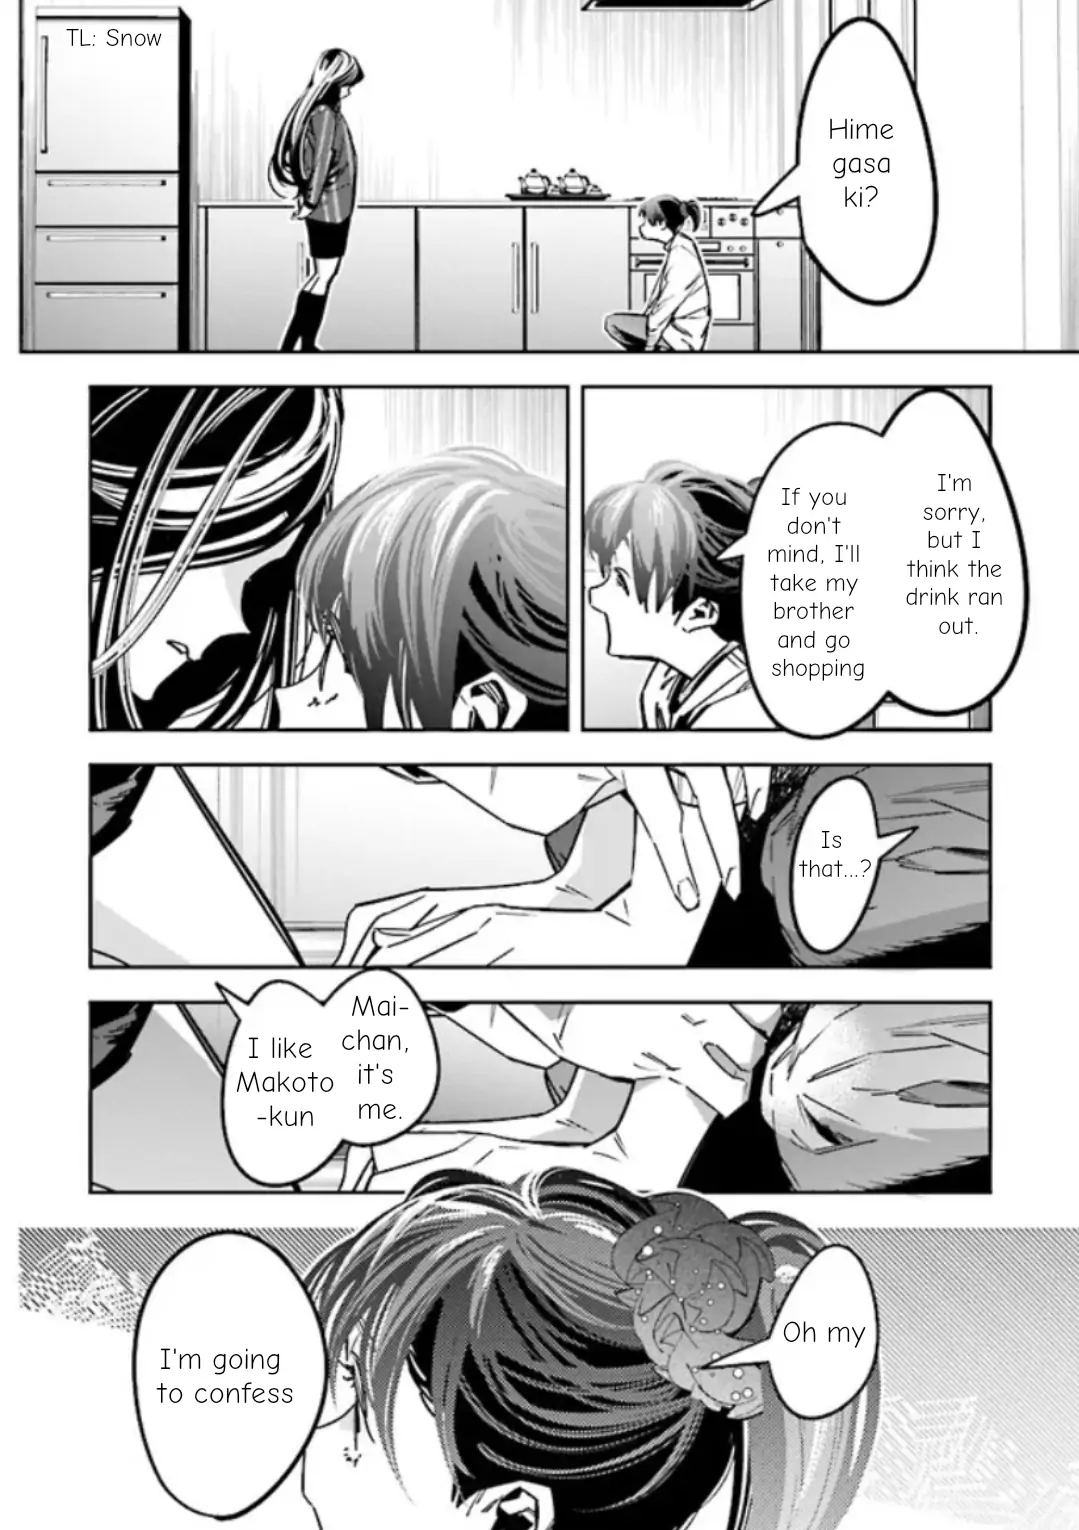 I Reincarnated As The Little Sister Of A Death Game Manga's Murder Mastermind And Failed - chapter 10 - #5